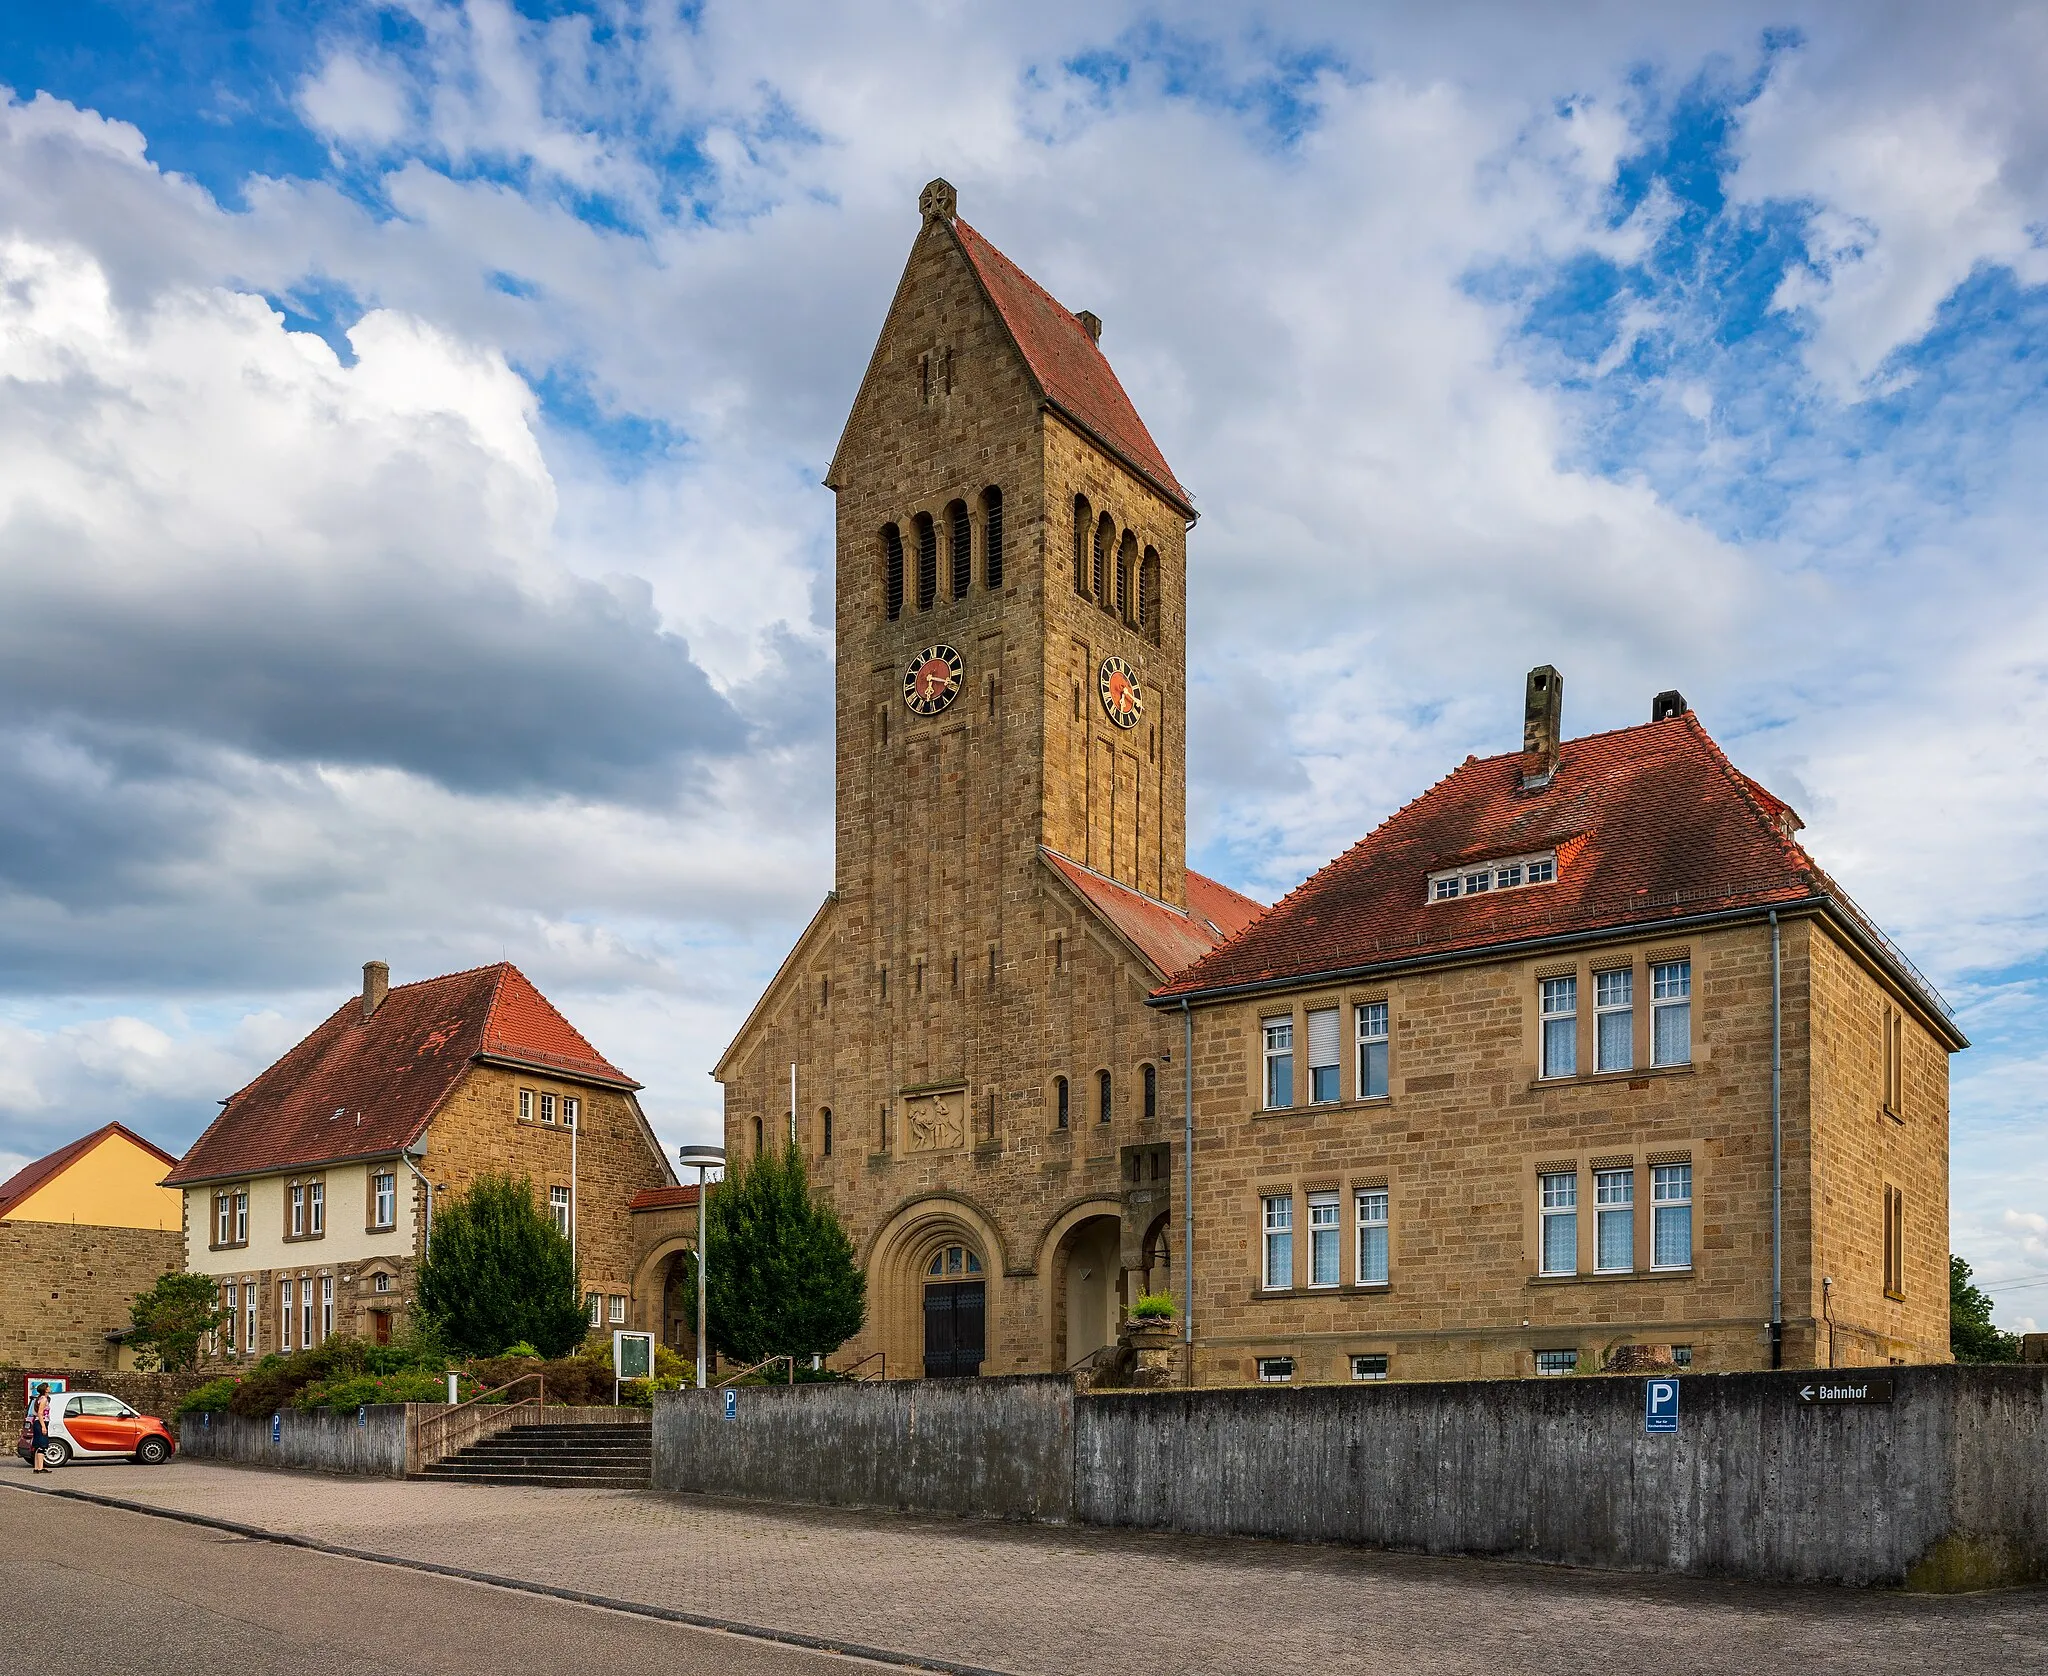 Photo showing: Oberderdingen, Germany, district Flehingen: the Saint Martin church, built in 1911 in Romanesque revival style together with the buildings at the left and right (rectory and kindergarden). View from northwest with evening sun. Hint: I have included by way of exception the person and the car intentionally because the church had such an surreal or computer-generated effect that I wanted the person and the car as signs of reality ;–).